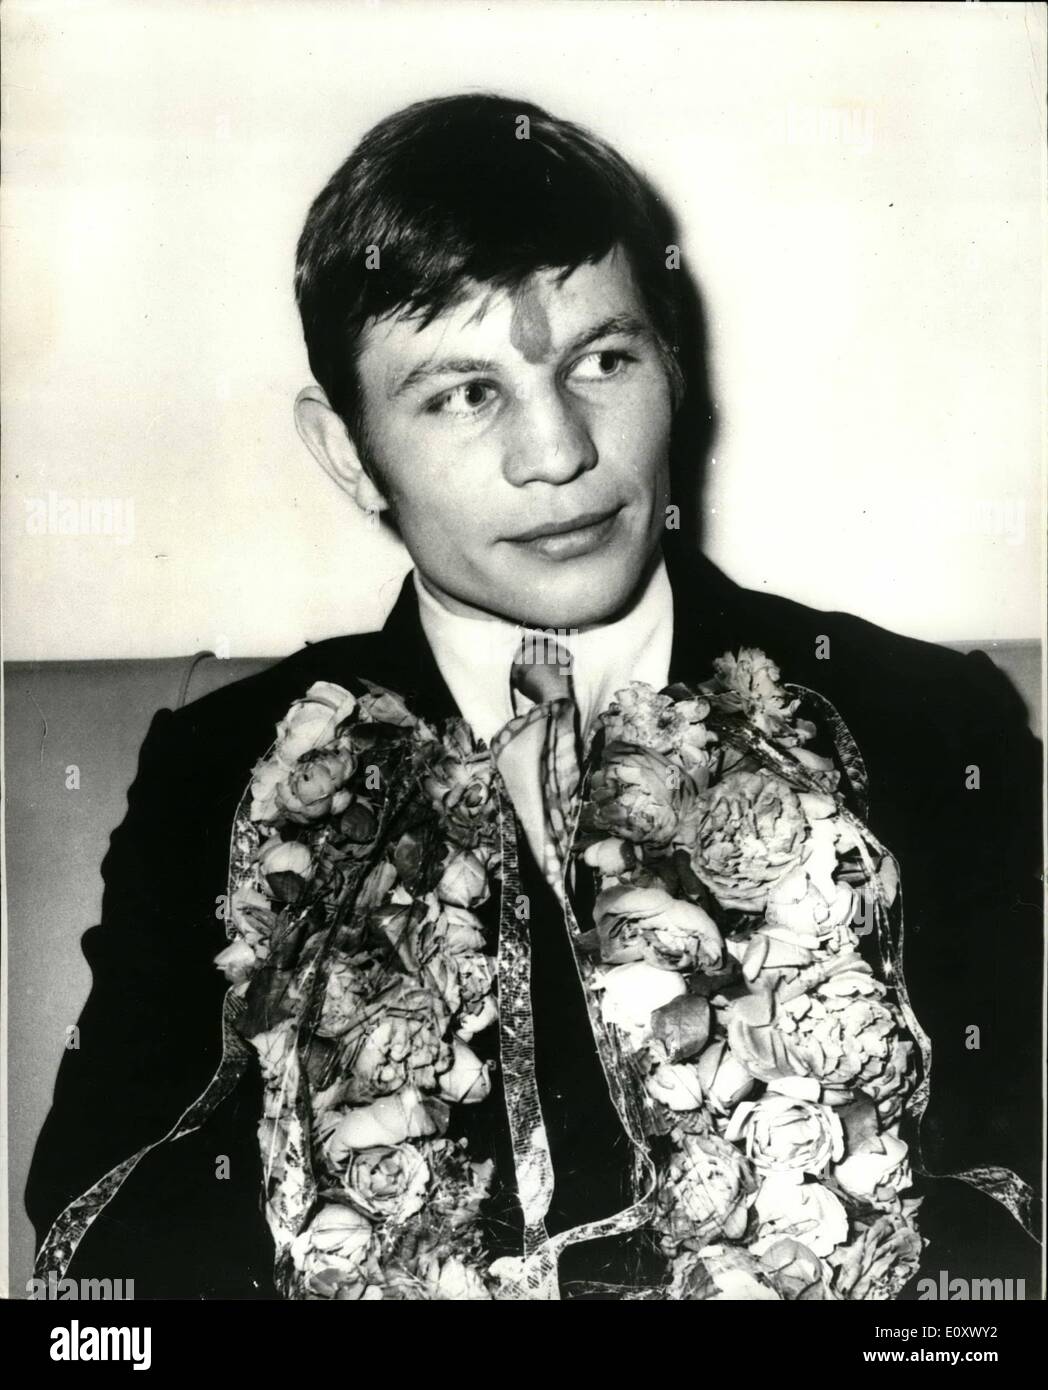 Dec. 12, 1967 - Michael York in Bombay to star in ''The Guru'.: Young British star Michael York arrived recently in Bombay to star in ''The Guru'', the very topical film to be produced by Merchant Ivory Productions for Twentieth Century - Fox. Michael plays the role of a famouos British pop singer Tom Pickle, who comes to India to study with a noted musician, a Guru. And since so many of today's young swingers and hippies are turning towards India for tranquility and solutions to their problems, he meets a British hippie, who will be played by Rita Tushingham Stock Photo